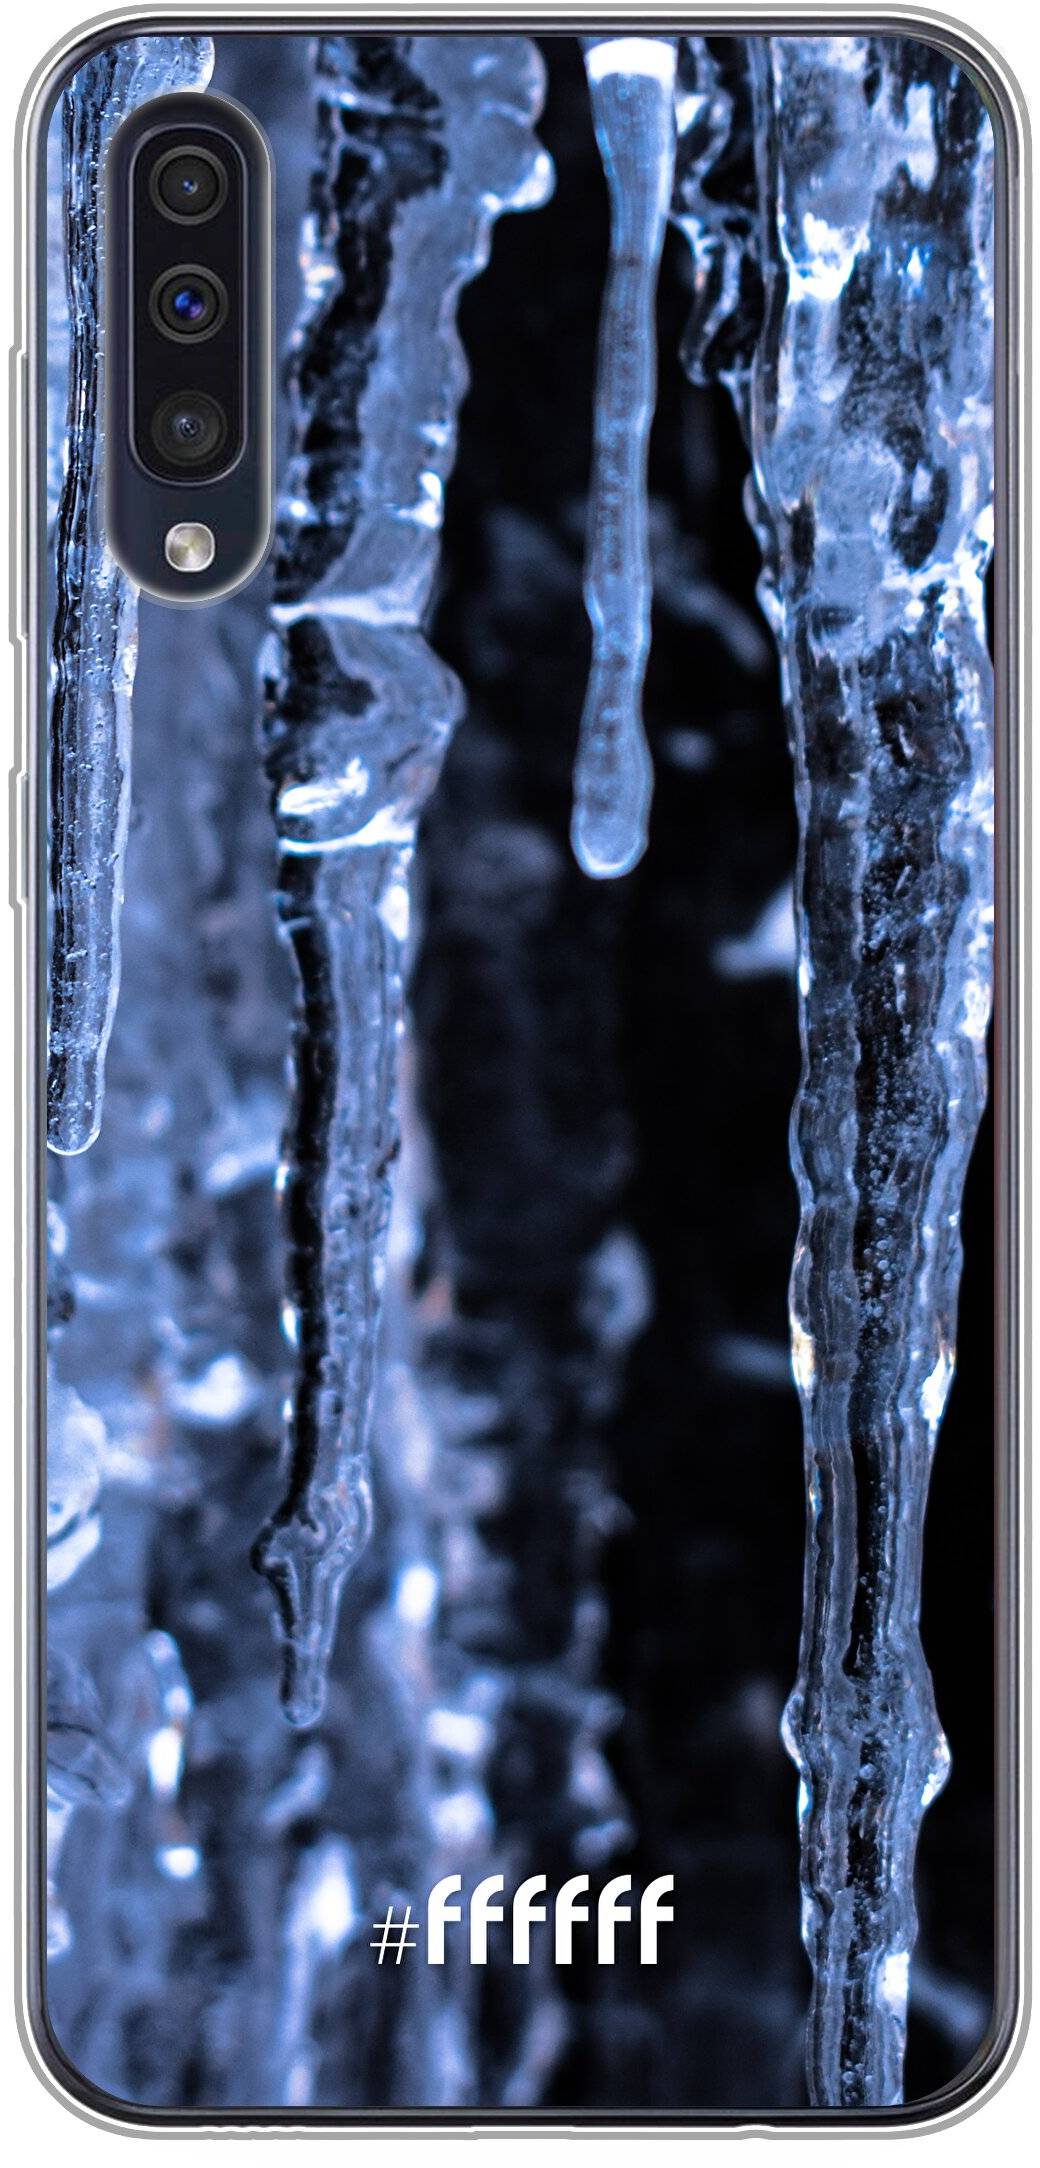 Icicles Galaxy A30s